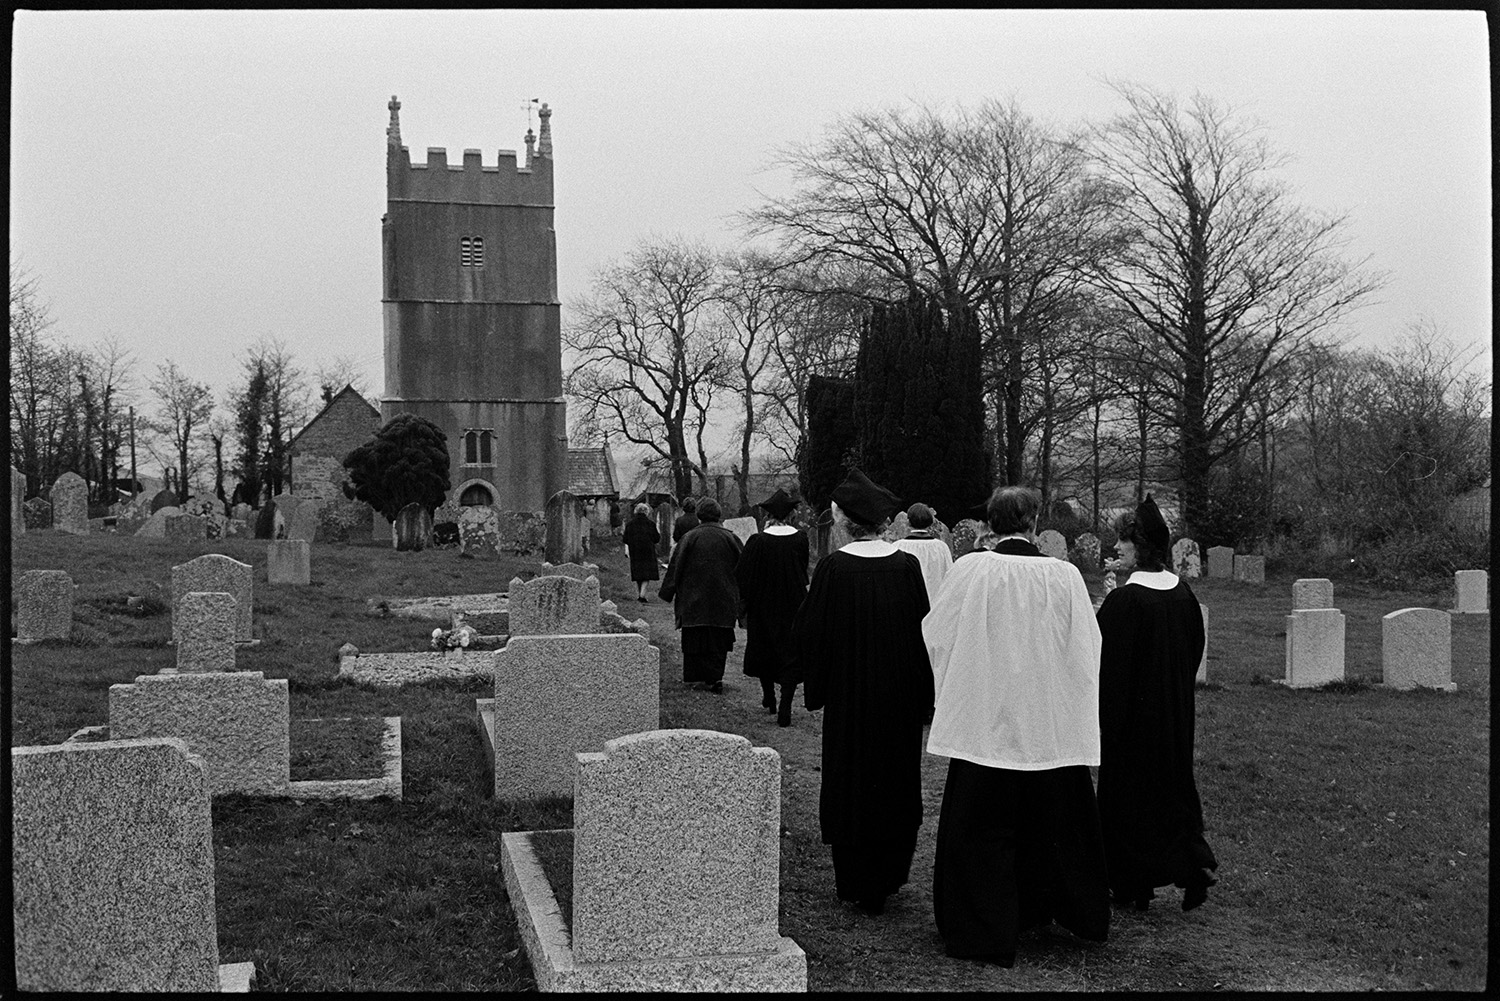 Christening with Bishop at village church, choir, uniform.
[Group of clergy and members of the congregation walking along a path between gravestones towards Inwardleigh Church Tower. Leafless trees are visible behind the church.]